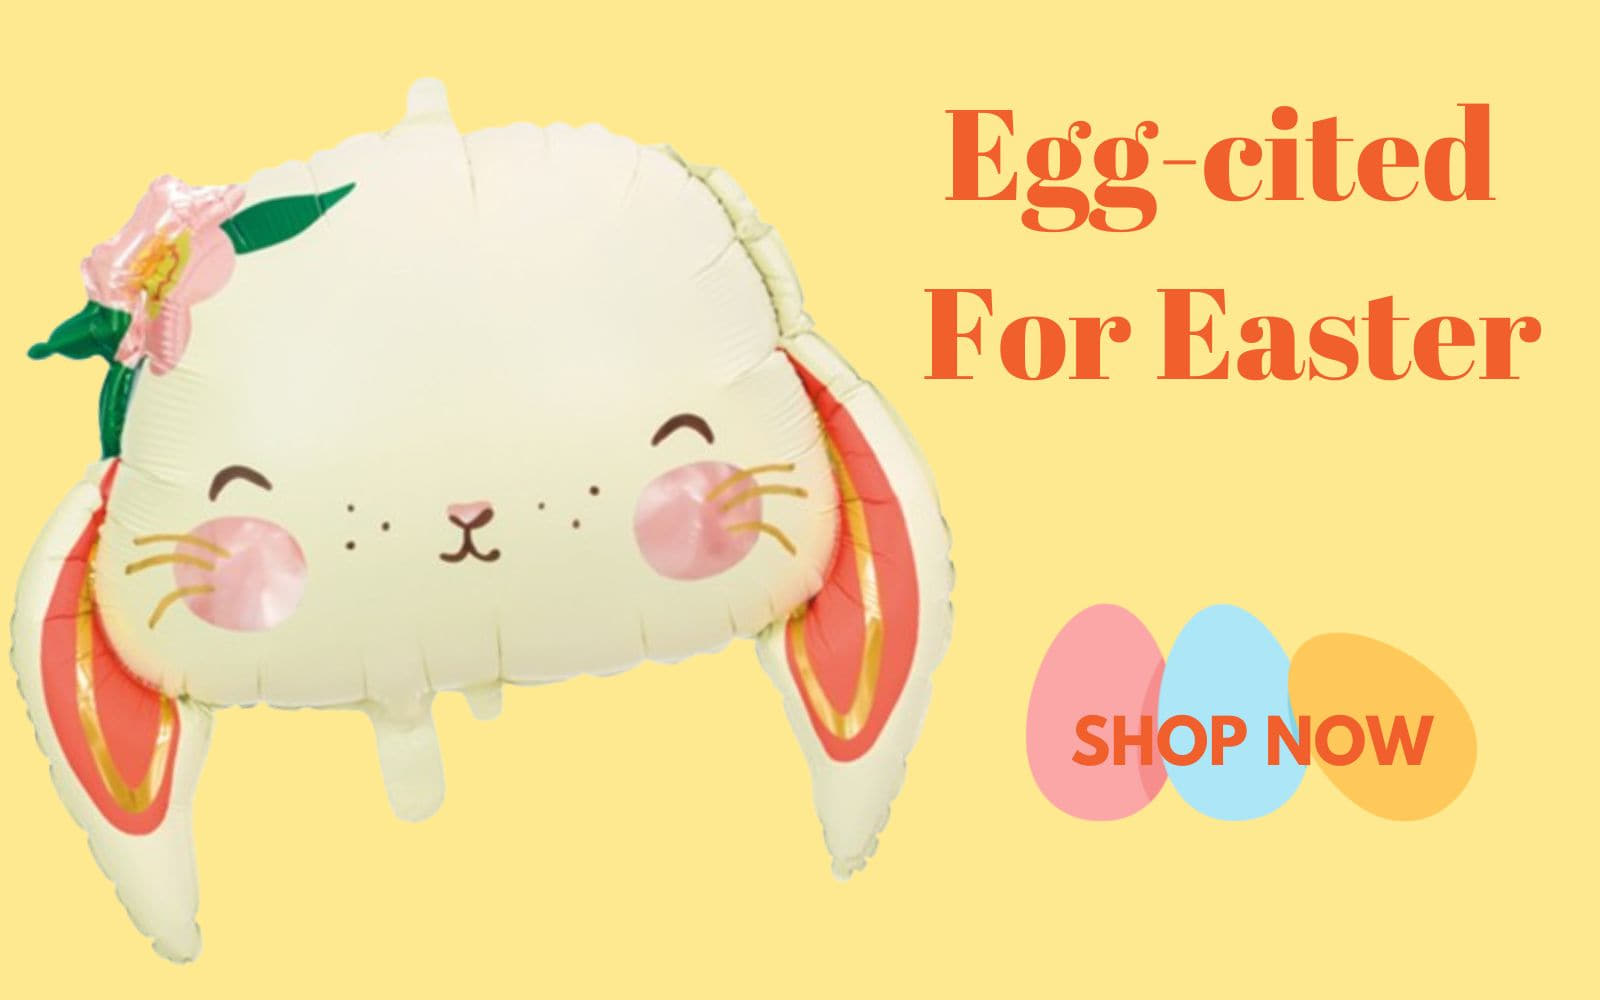 Easter Party Supplies, Decorations and Balloons I My Dream Party Shop UK